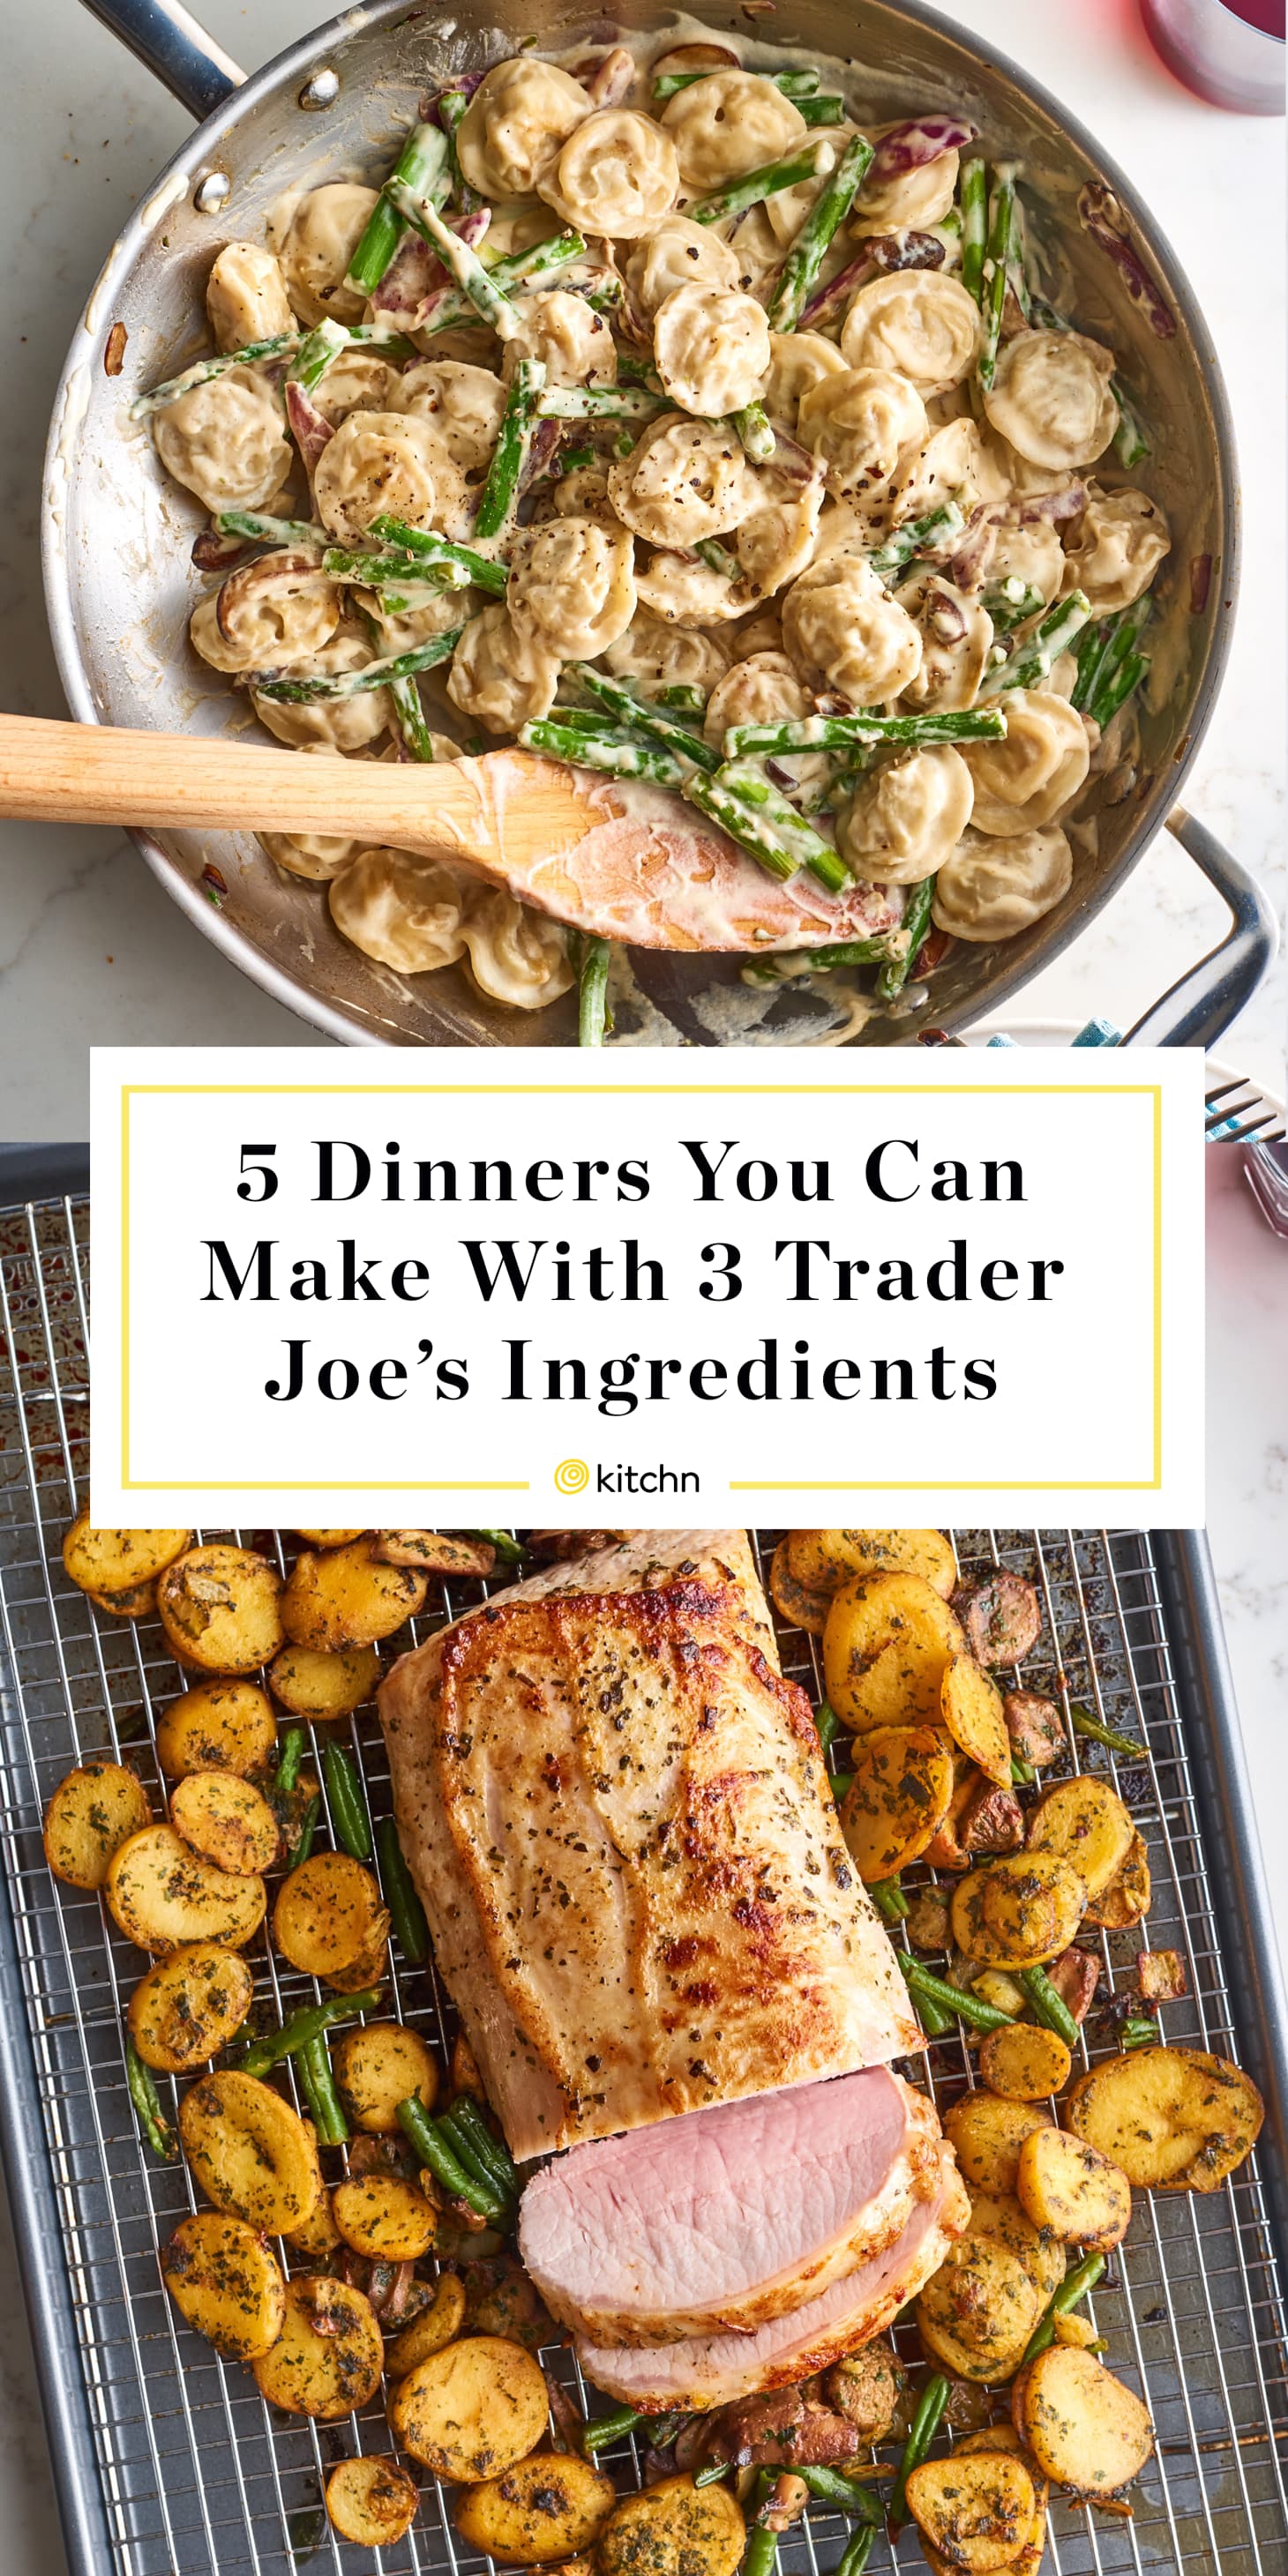 5 Easy Trader Joe's Dinners with Only 3 Ingredients | Kitchn